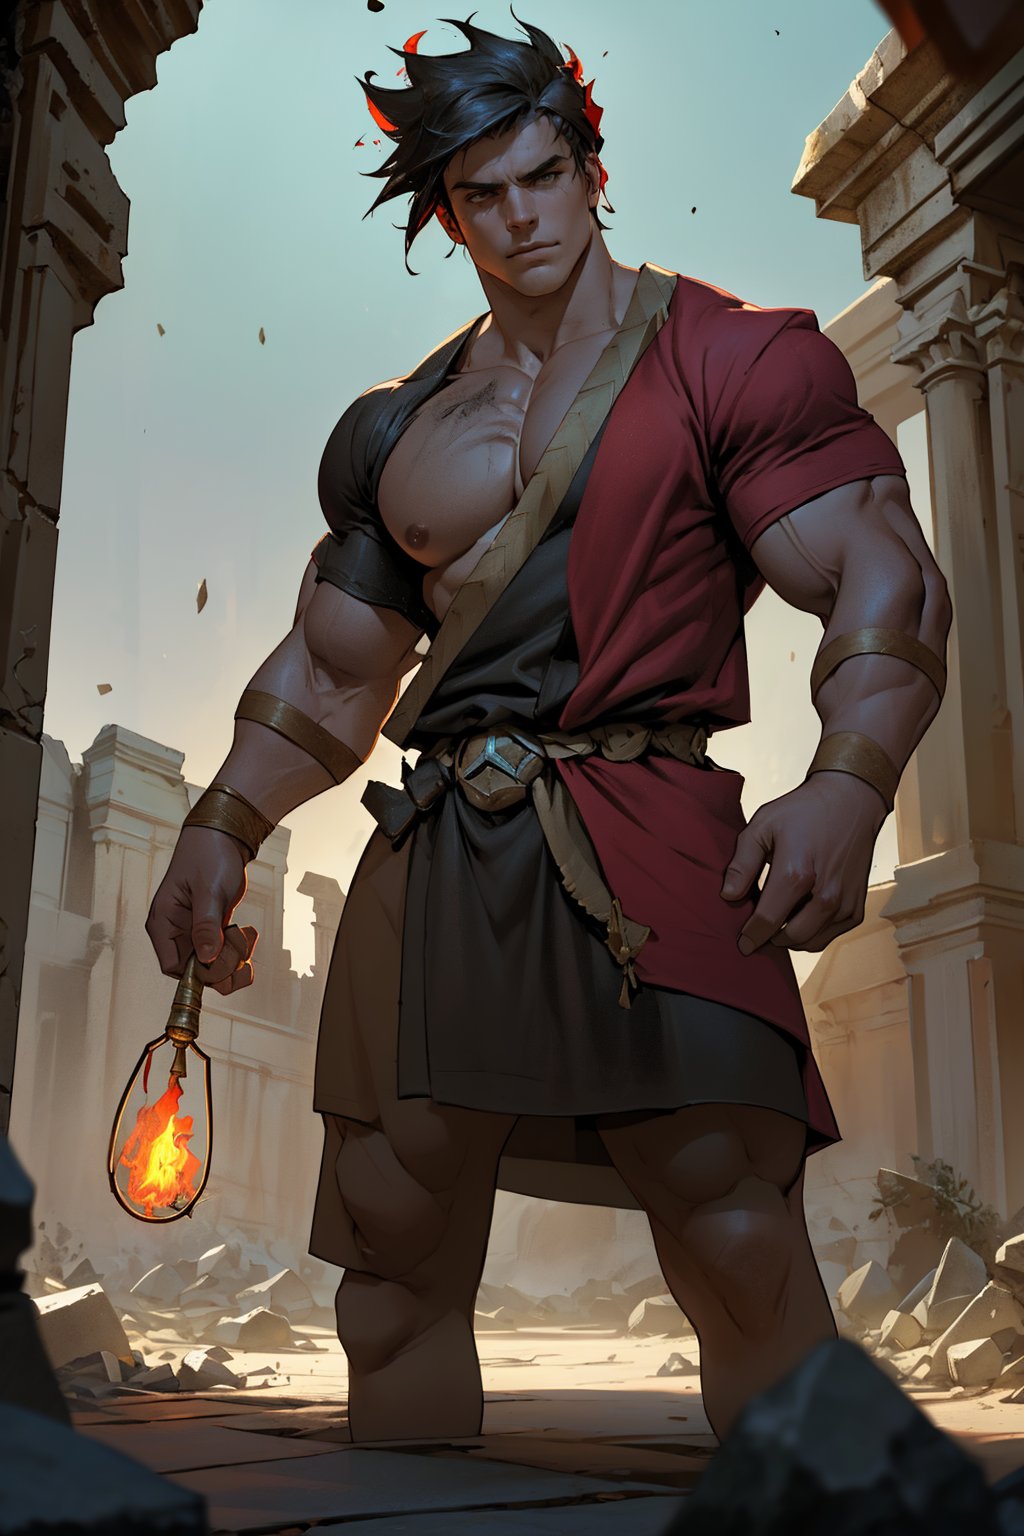 A close-up shot of Zagreus' chiseled physique, highlighting his robust muscles as he stands confidently in a dimly lit, ancient ruin. His rugged features and piercing gaze are framed by crumbling stone walls, while the flickering torchlight casts long shadows across his powerful form.